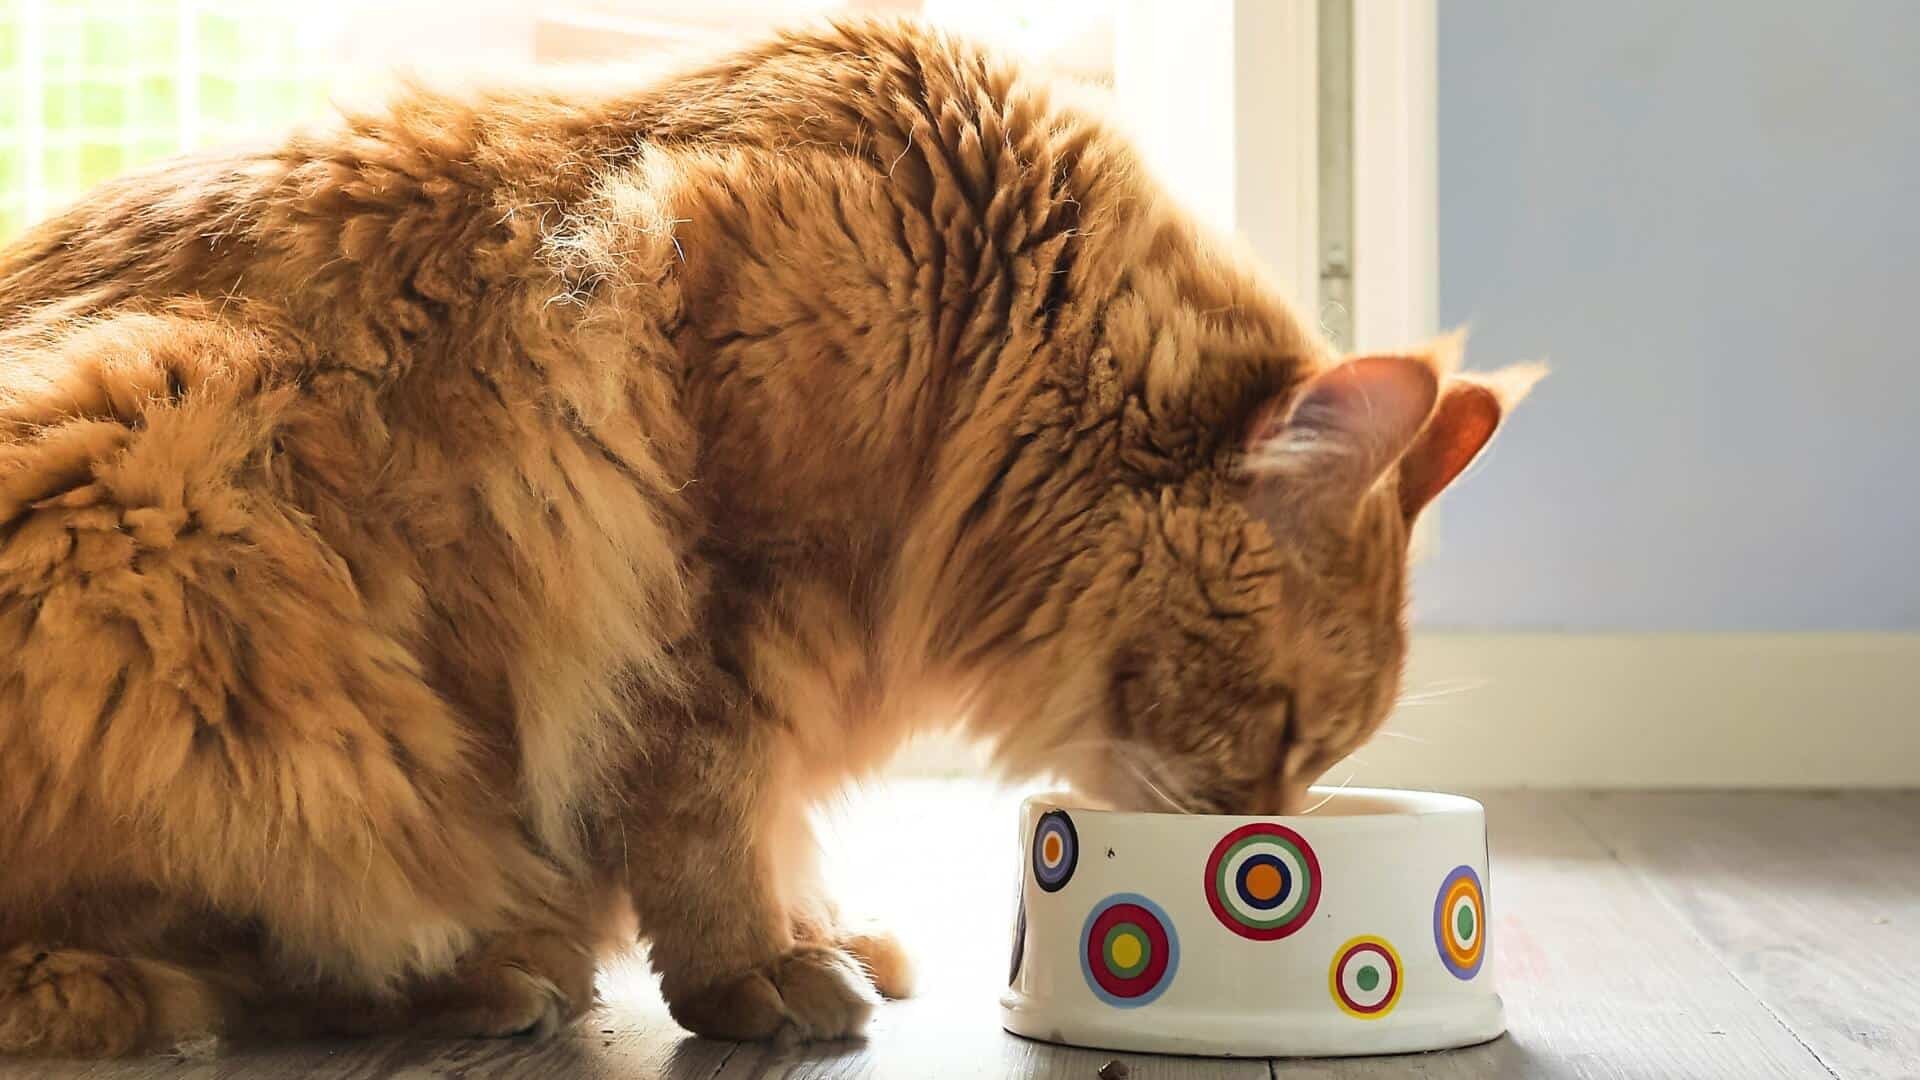 Profile of cat eat from bowl by Nektarstock